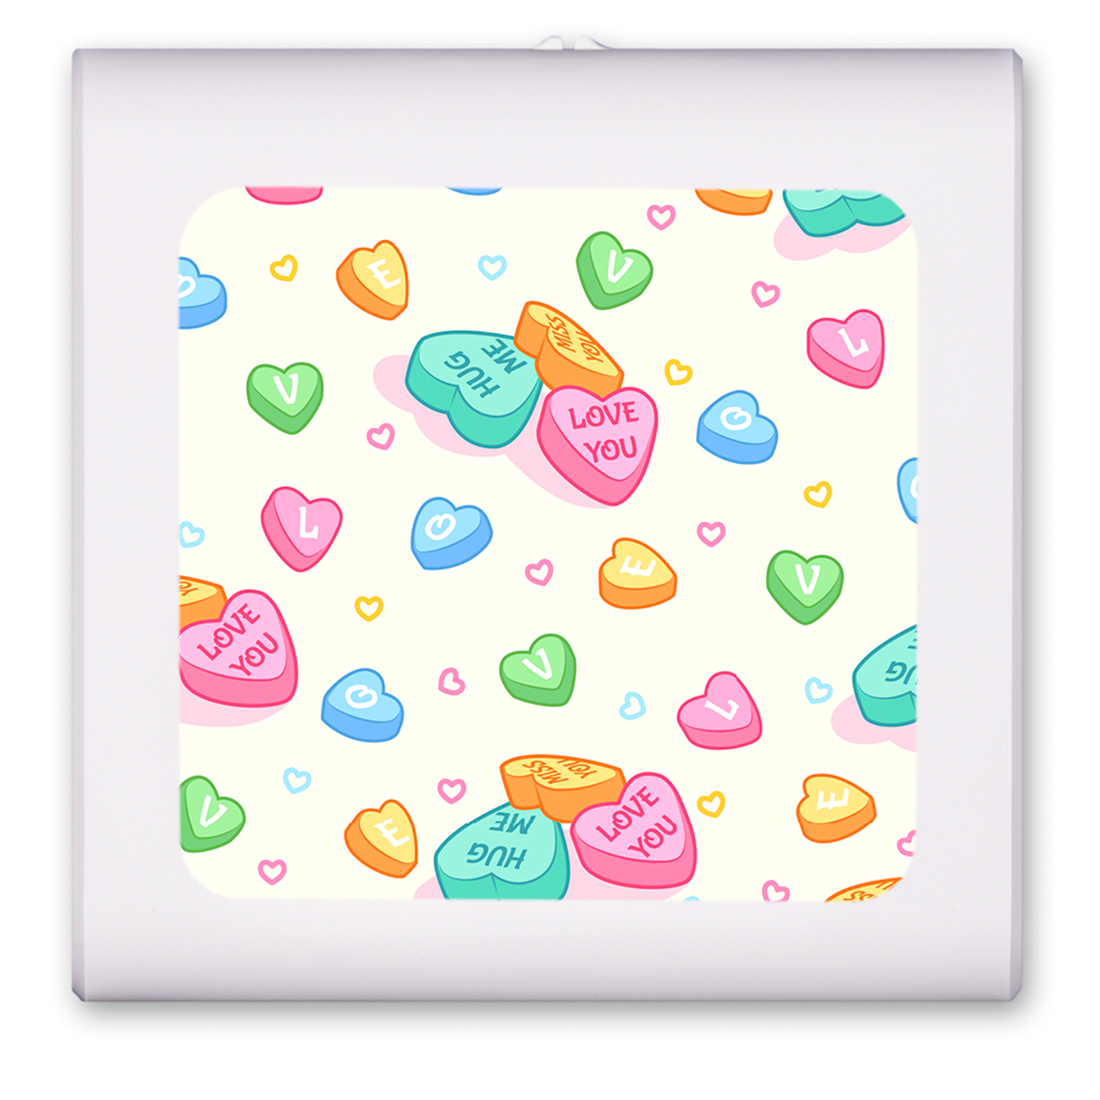 Candy Hearts - #8702